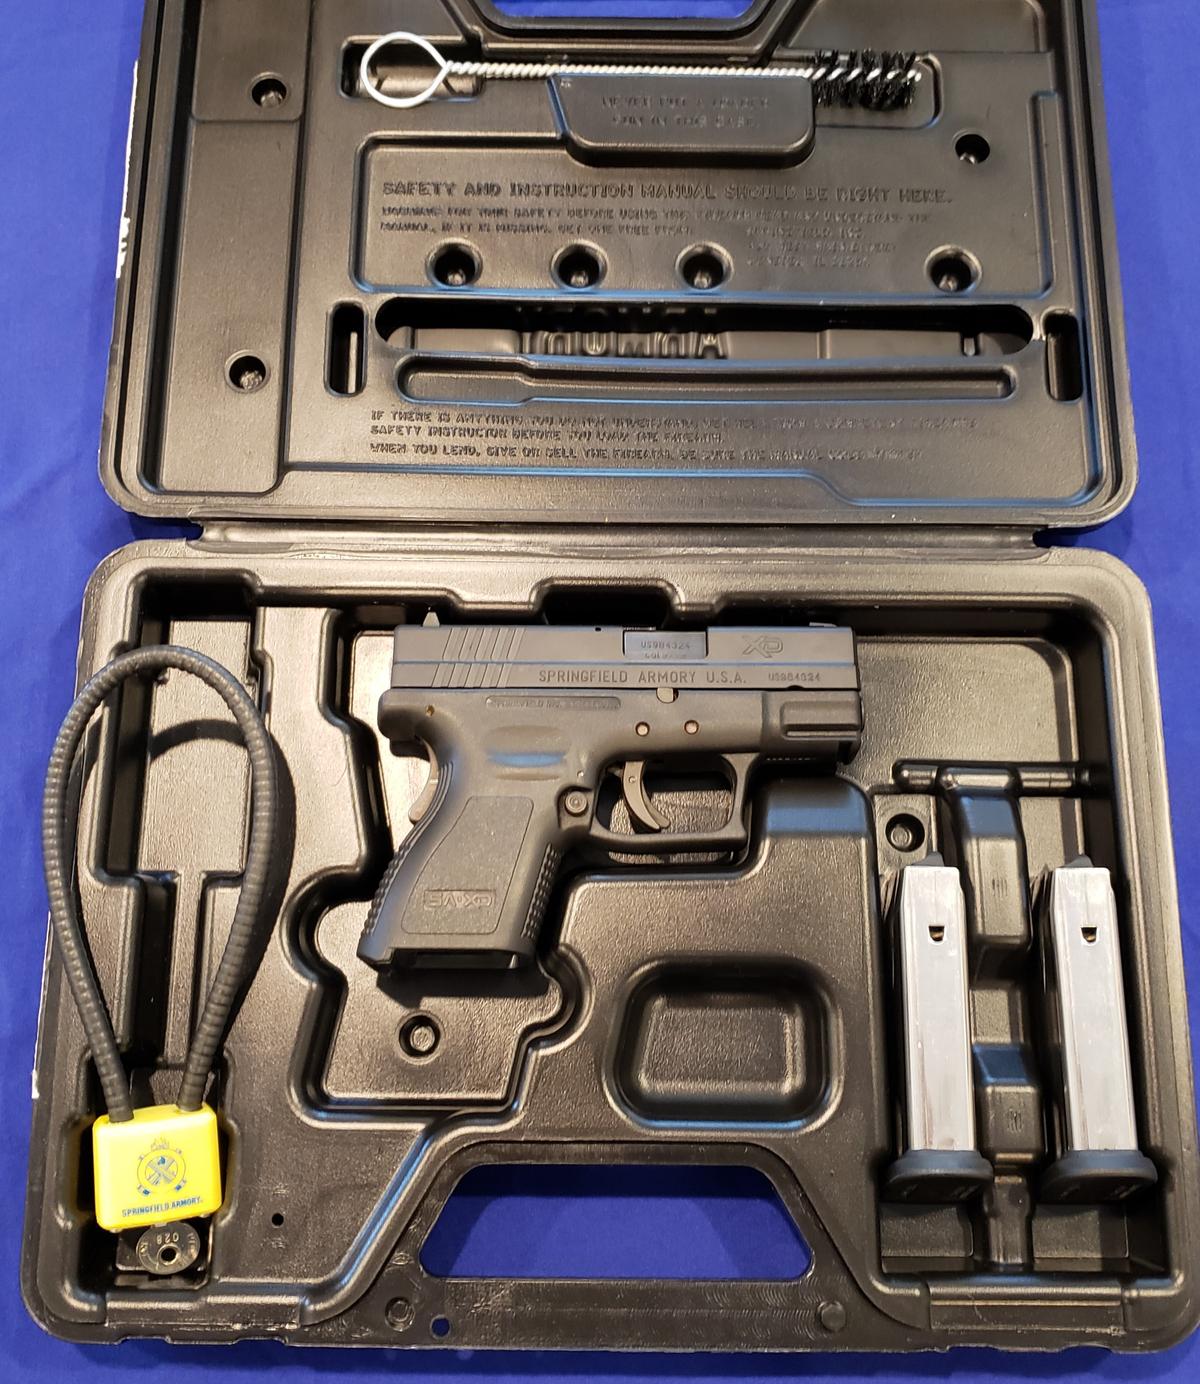 SPRINGFIELD ARMORY XD9 SUBCOMPACT PISTOL 9MM EXCELLENT CONDITION